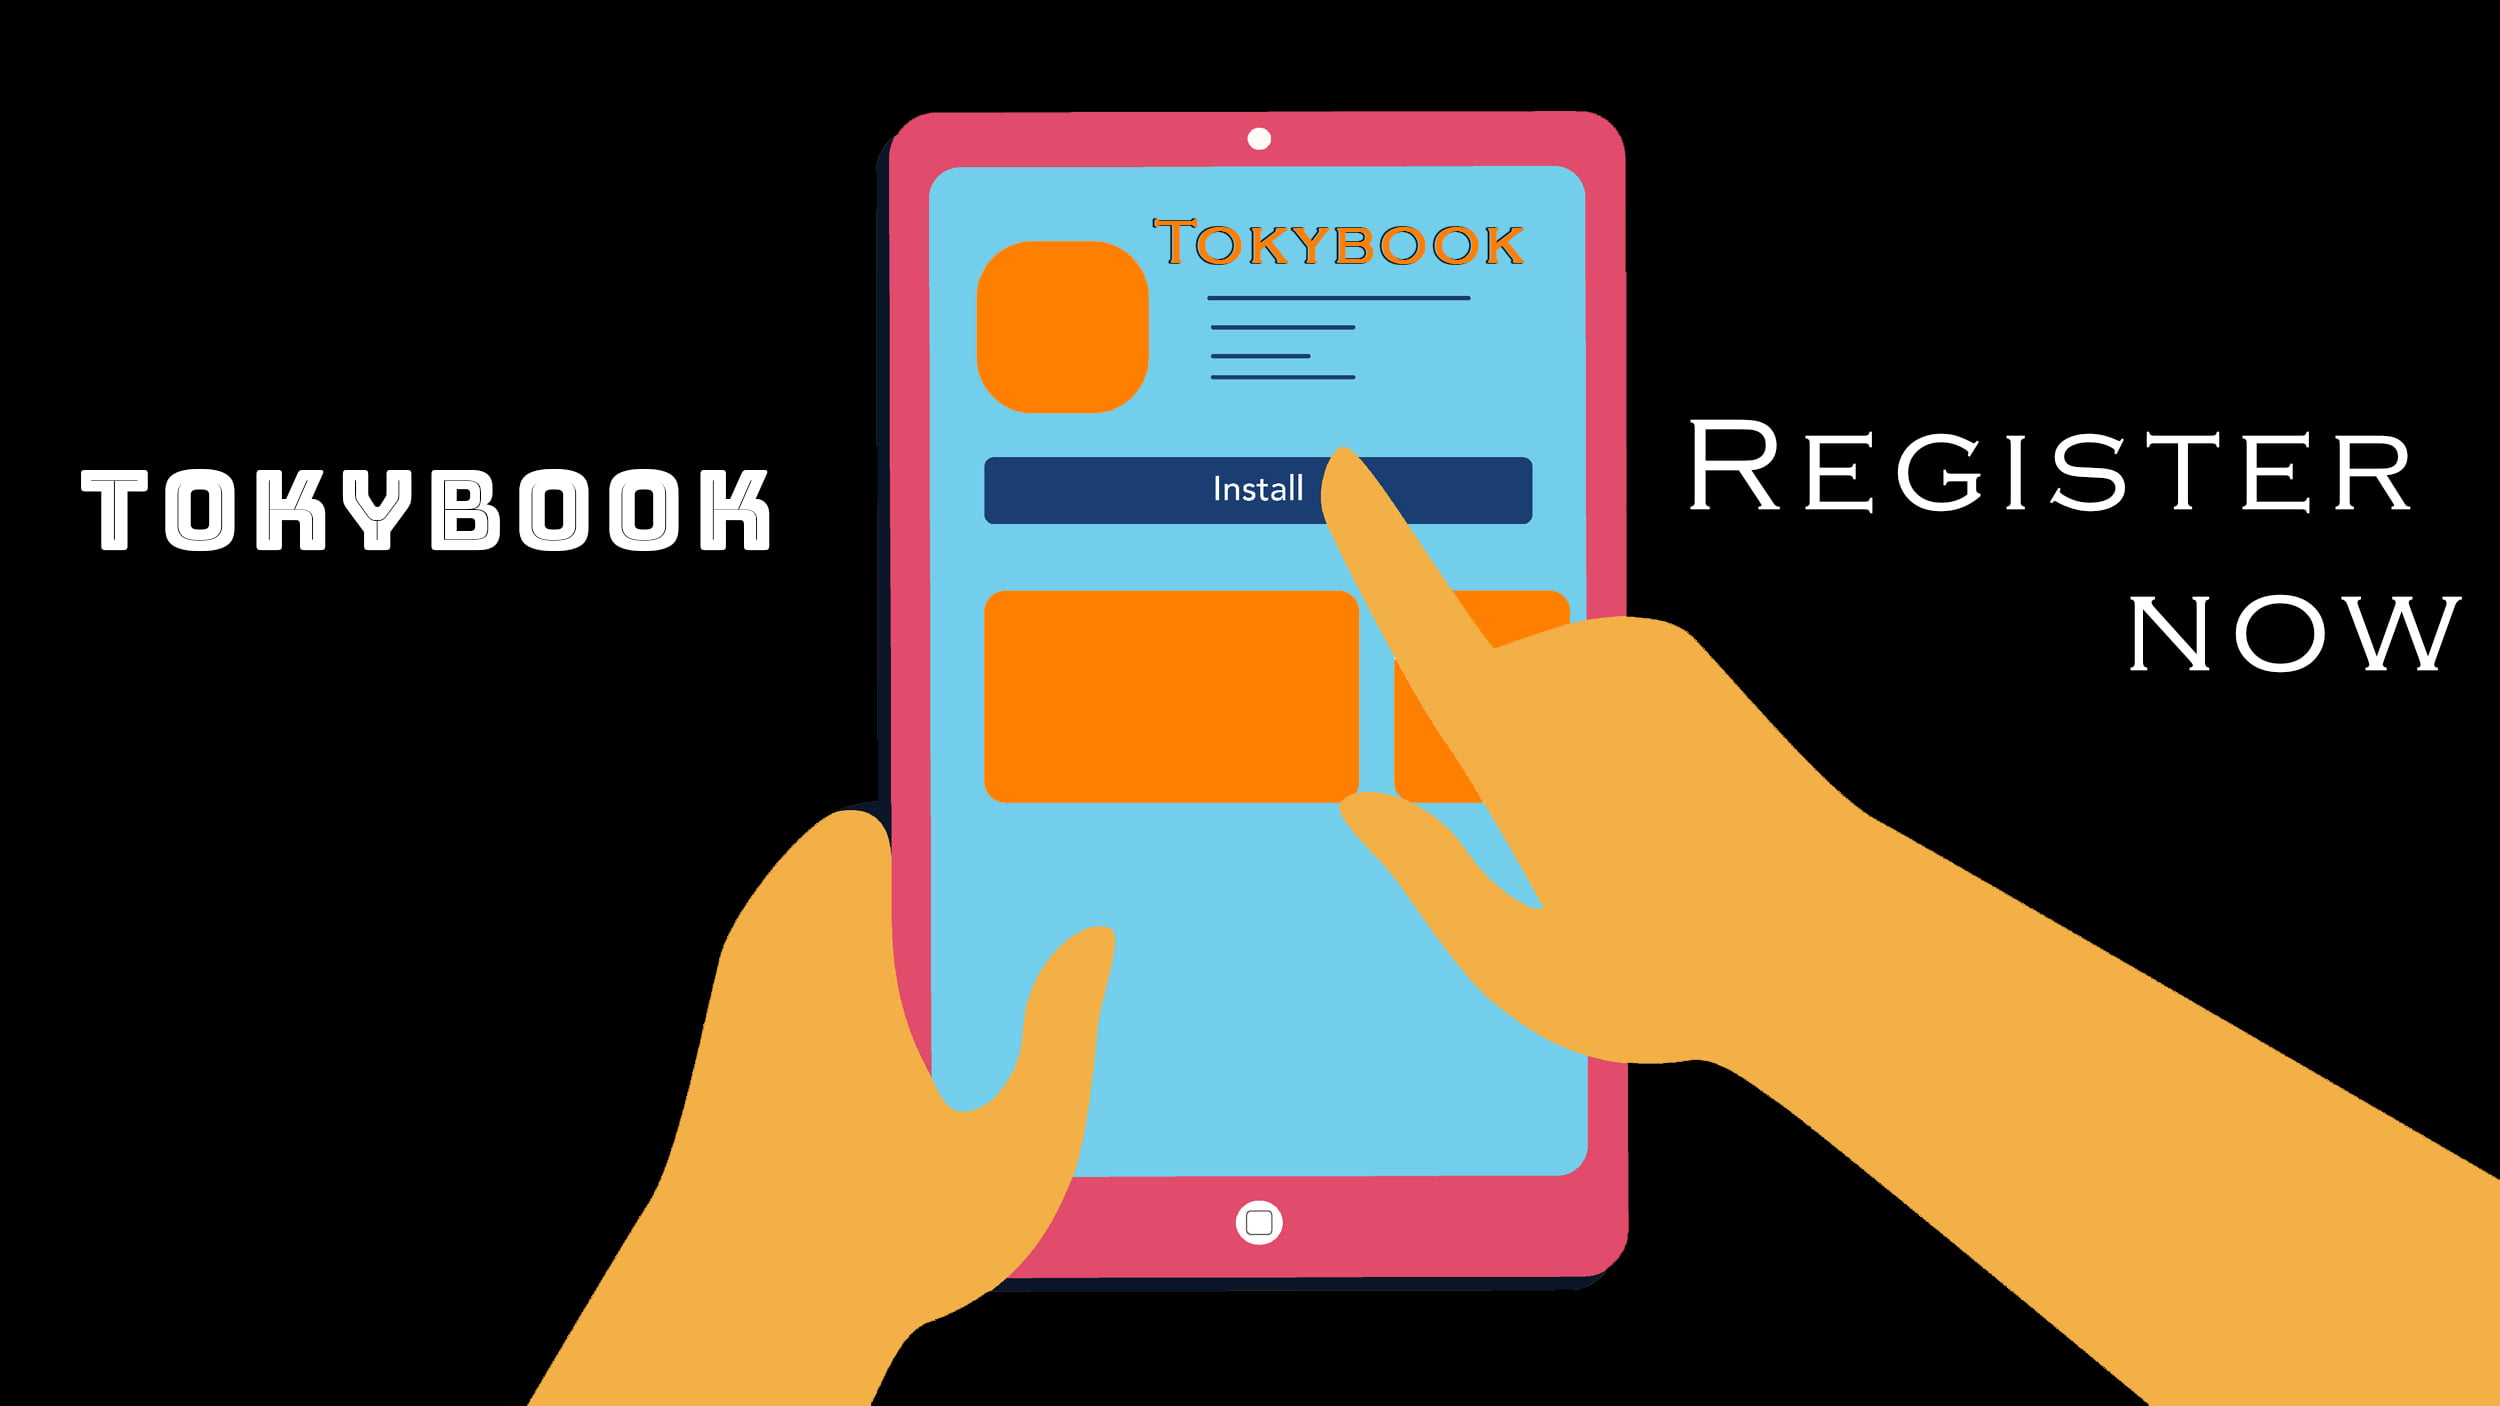 Register for the Tokybook Application Now